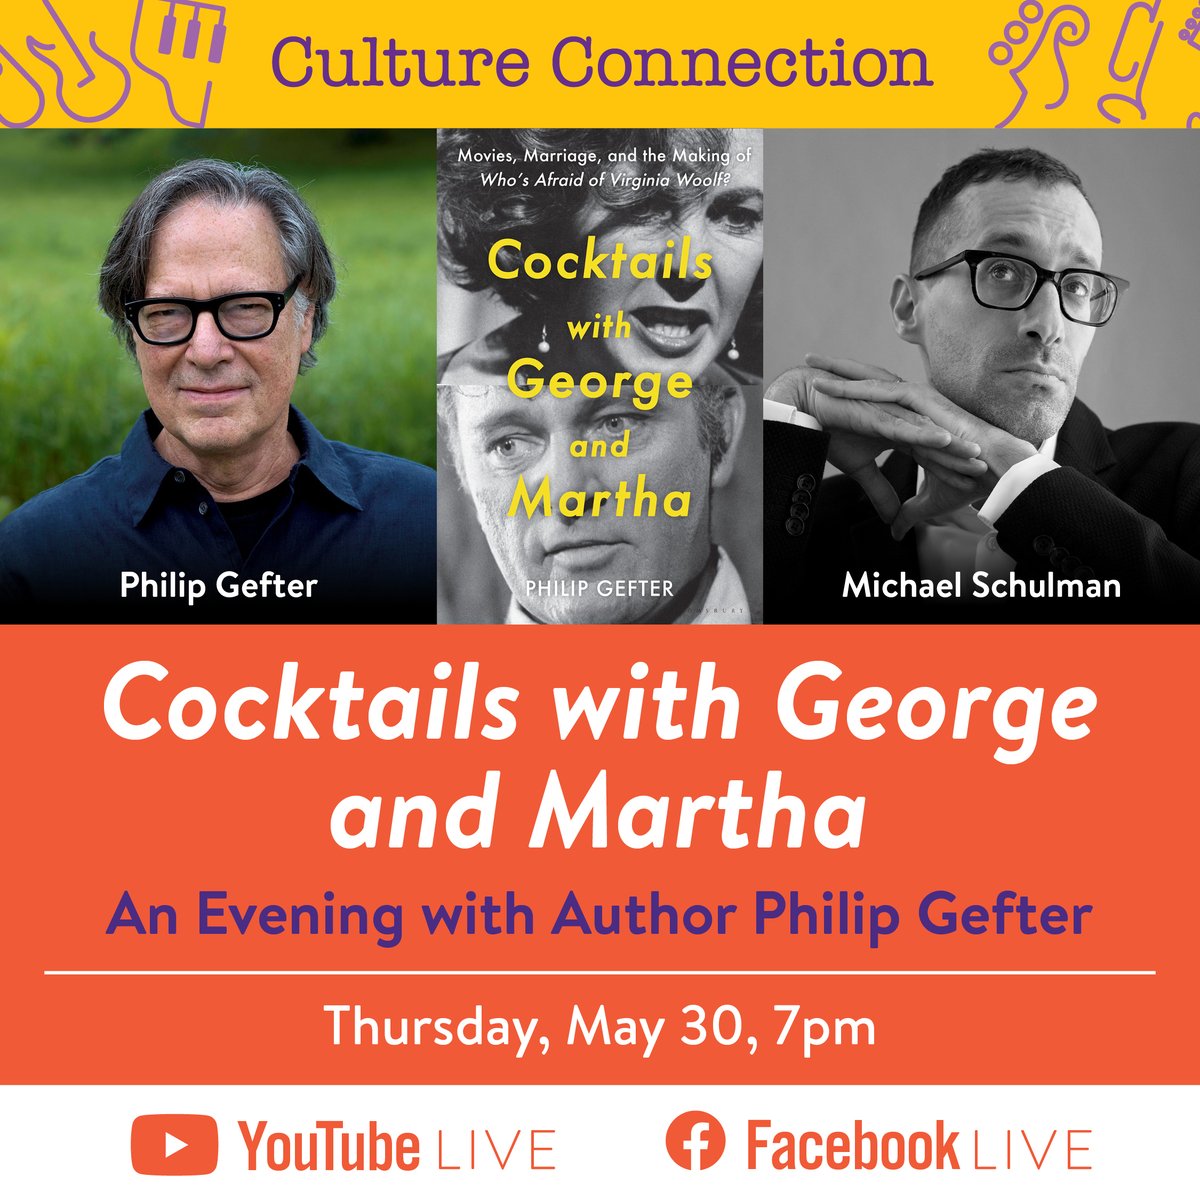 QPL’s Culture Connection is delighted to host this film history book talk with authors Philip Gefter and @MJSchulman and filmmaker/producer @TaylorPurdee! Watch live on Thursday, May 30 at 7PM. facebook.com/QPLNYC/videos youtube.com/live/9WM-0HJ4V…